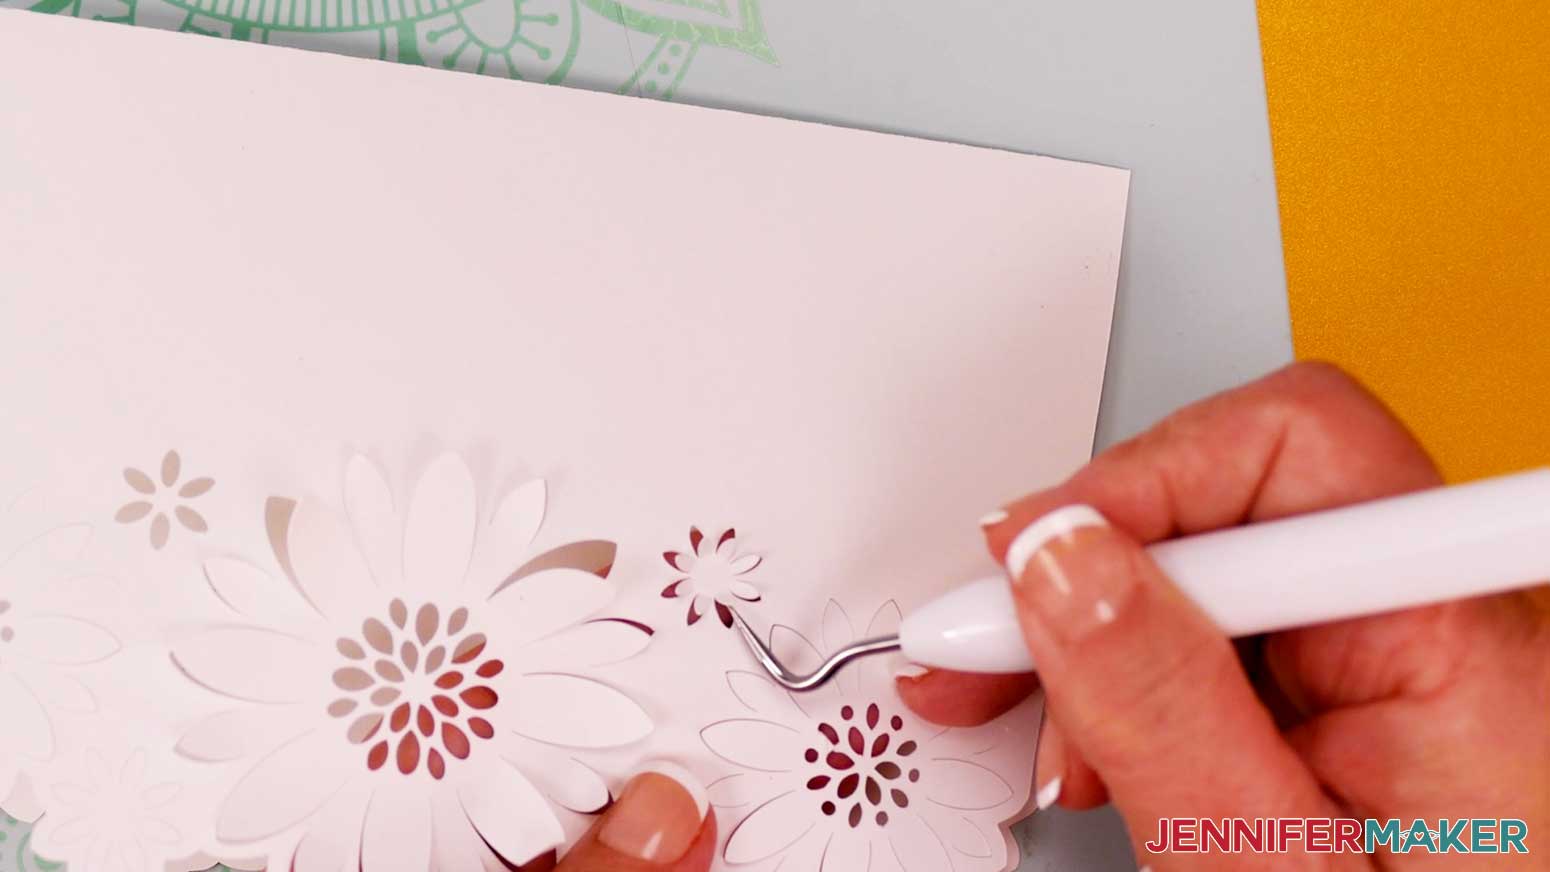 Use a weeding tool to lift and bend the small flower petals upward for the flower shaped edge card design